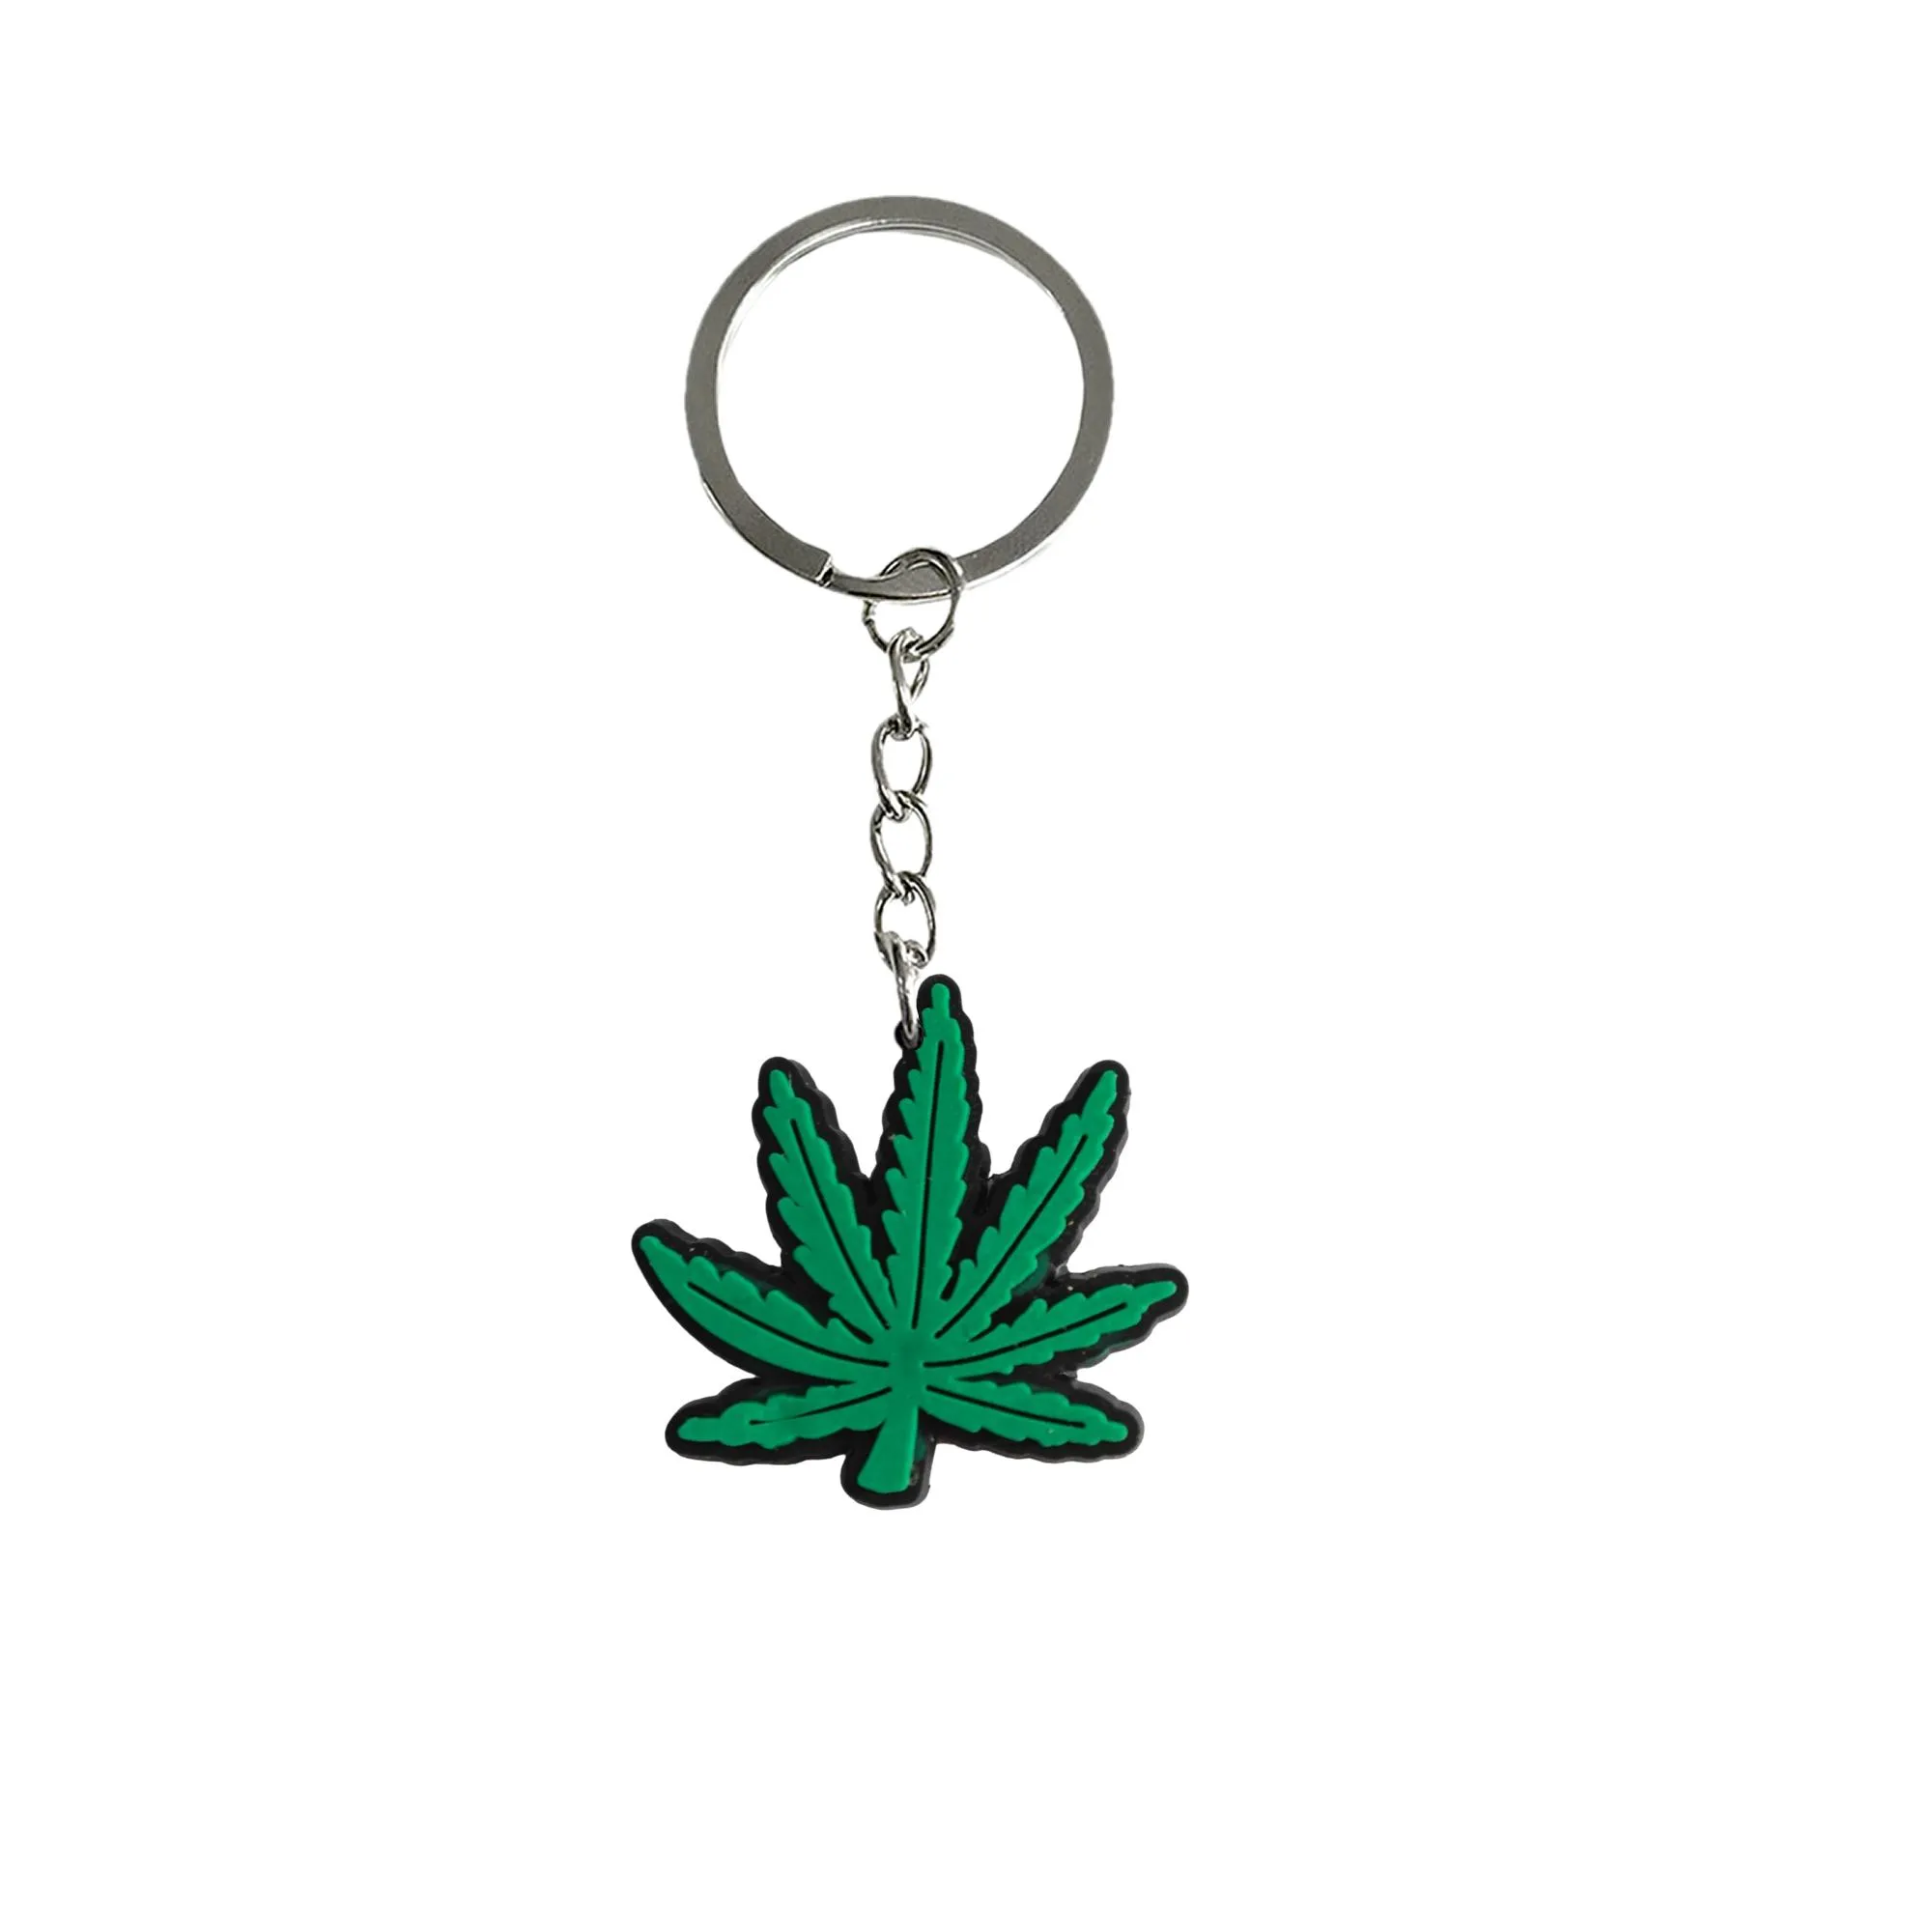 green plants keychain keychains for girls goodie bag stuffers supplies key pendant accessories bags keyring suitable schoolbag boys cute silicone chain adult gift couple backpack chains women